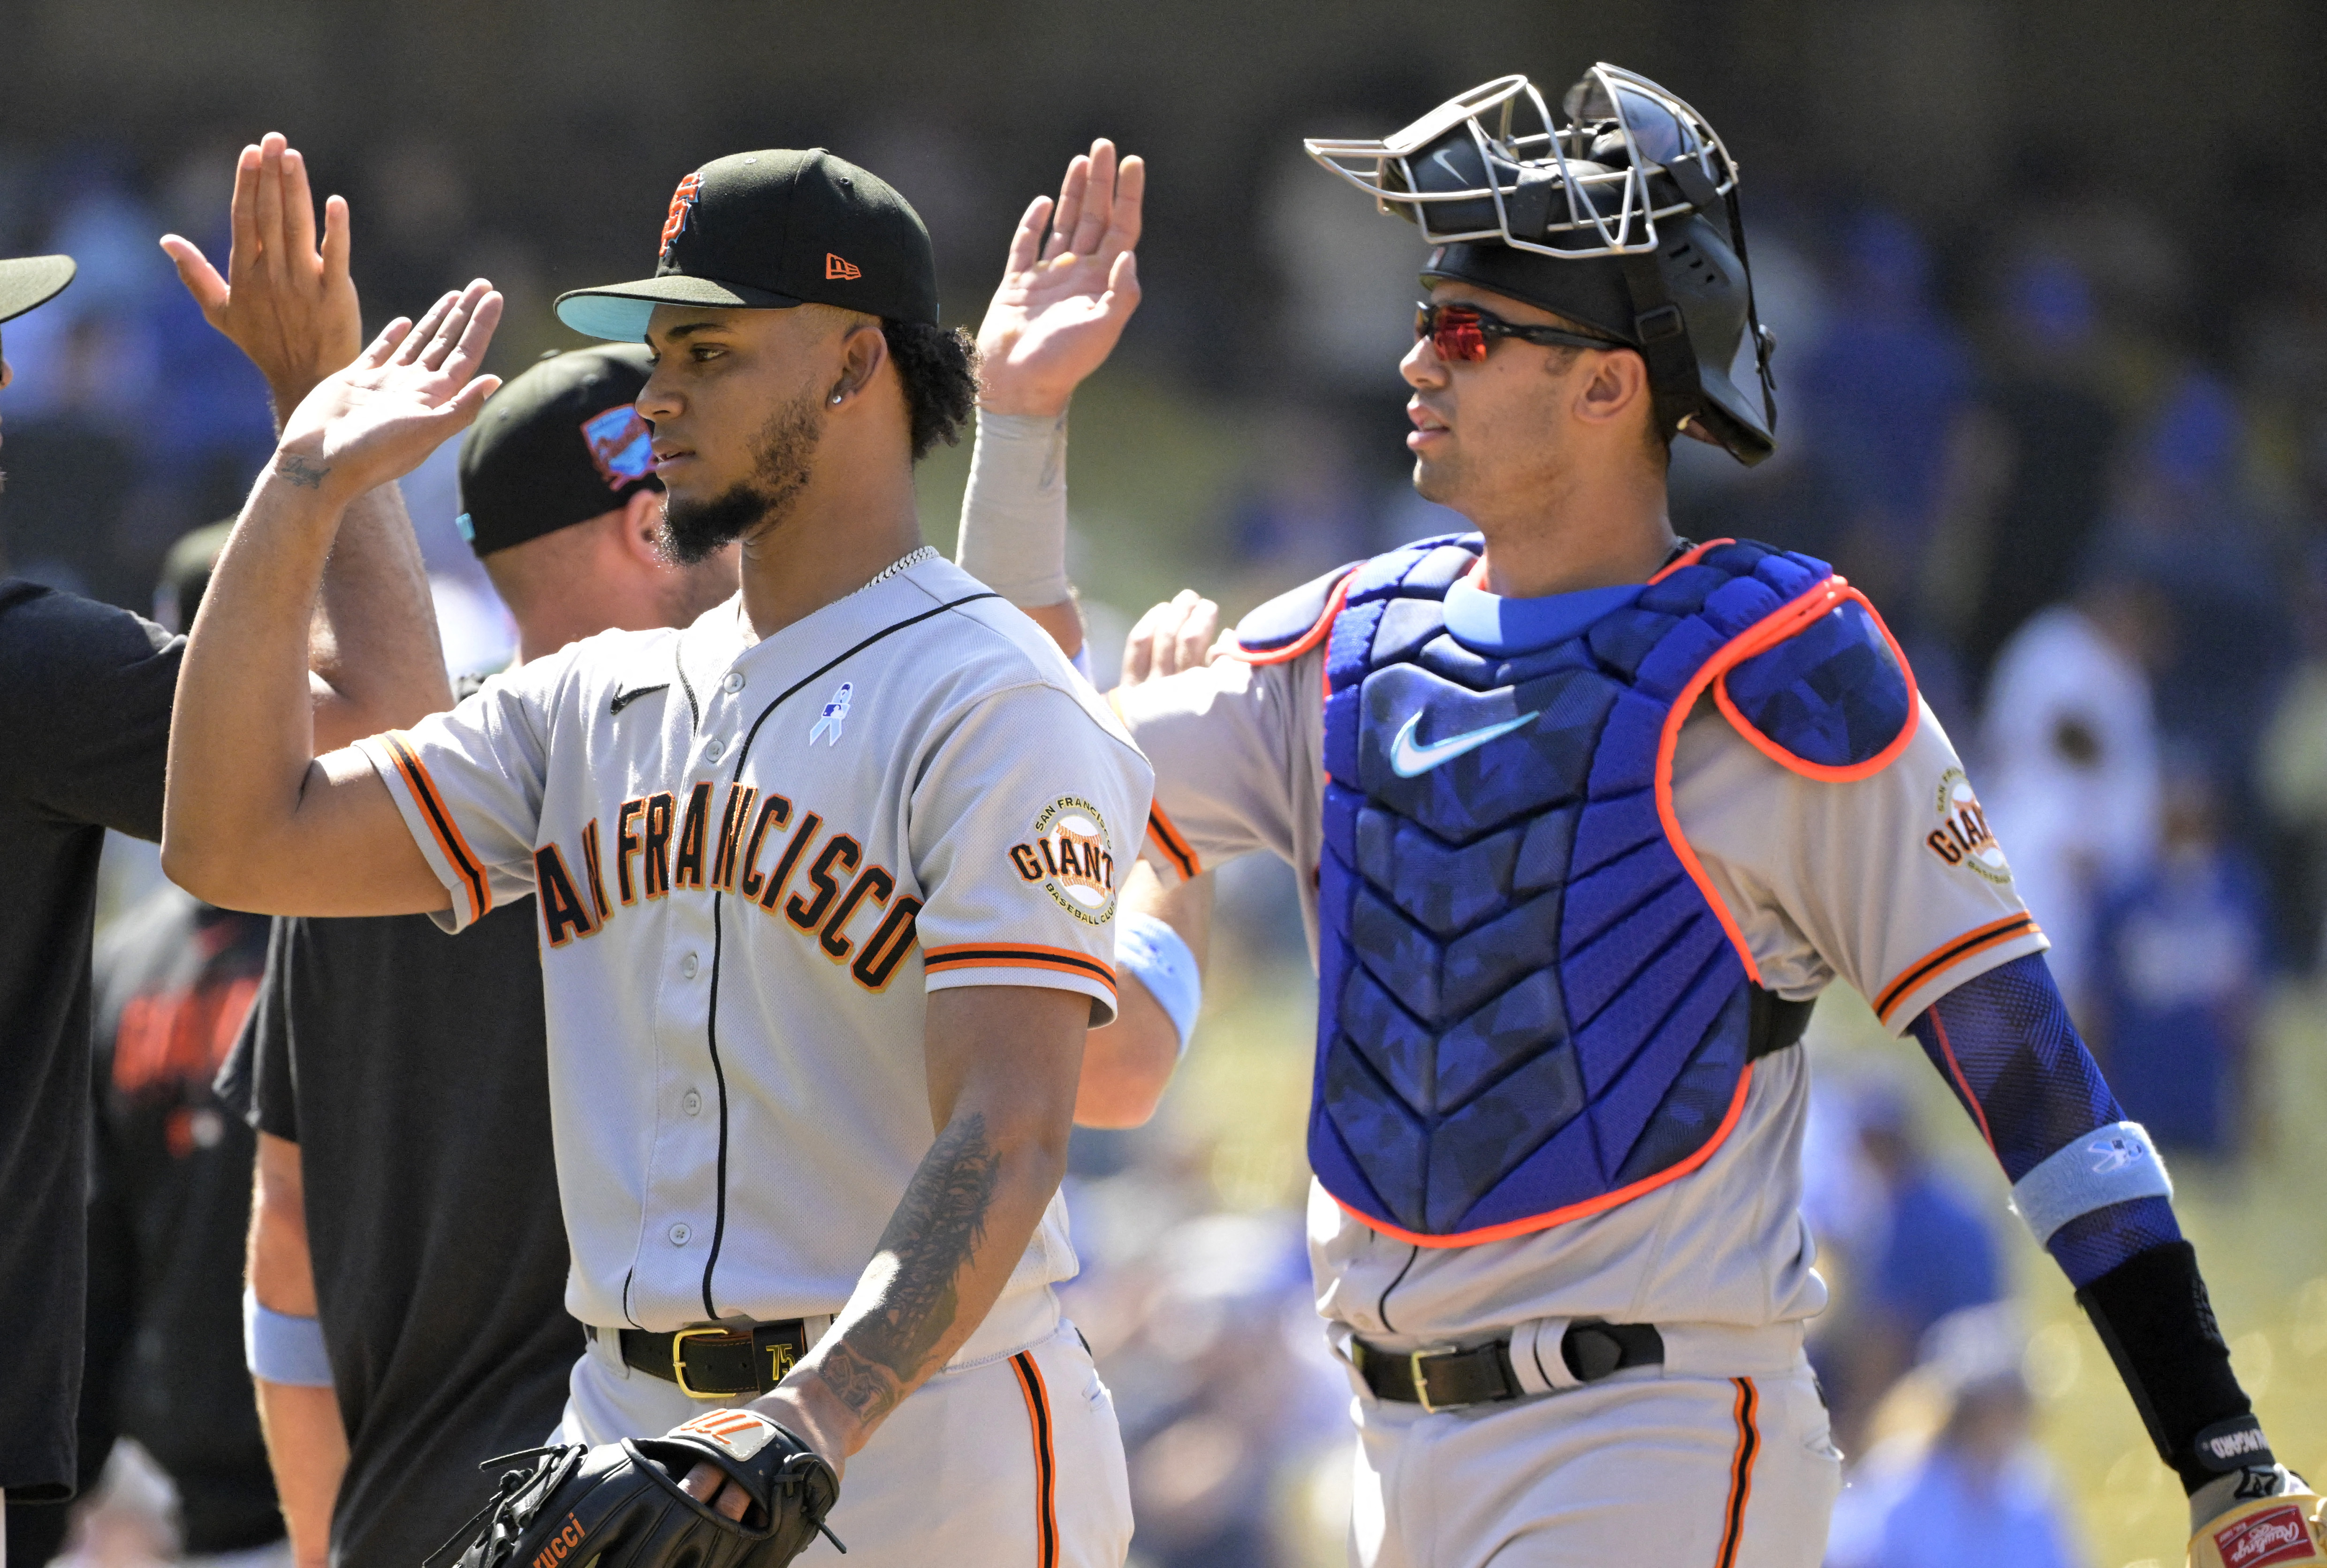 Giants finish off rare sweep of Dodgers in LA with 7-3 win